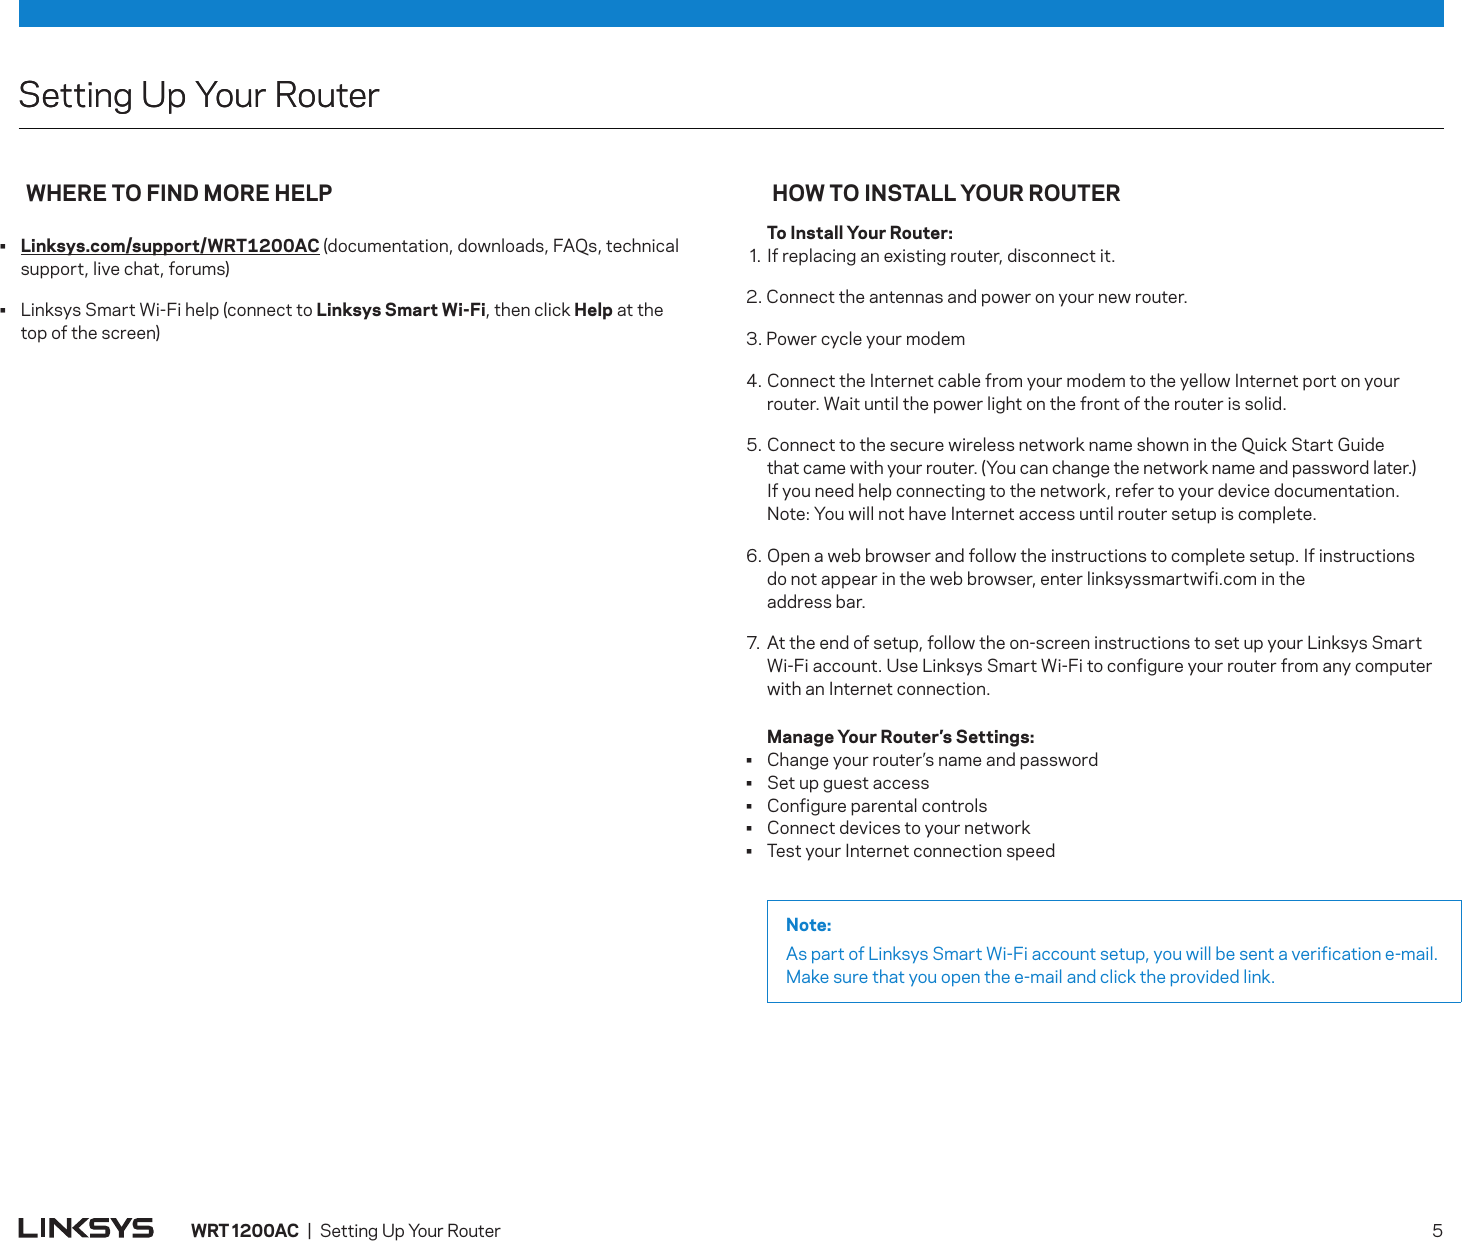 Setting Up Your RouterWHERE TO FIND MORE HELP•  Linksys.com/support/WRT1200AC (documentation, downloads, FAQs, technical support, live chat, forums)•  Linksys Smart Wi-Fi help (connect to Linksys Smart Wi-Fi, then click Help at the  top of the screen)HOW TO INSTALL YOUR ROUTER  To Install Your Router: . If replacing an existing router, disconnect it. 2. Connect the antennas and power on your new router.3. Power cycle your modem4.     Connect the Internet cable from your modem to the yellow Internet port on your router. Wait until the power light on the front of the router is solid.5. Connect to the secure wireless network name shown in the Quick Start Guide  that came with your router. (You can change the network name and password later.)  If you need help connecting to the network, refer to your device documentation.  Note: You will not have Internet access until router setup is complete.6.  Open a web browser and follow the instructions to complete setup. If instructions  do not appear in the web browser, enter linksyssmartwifi.com in the  address bar.7. At the end of setup, follow the on-screen instructions to set up your Linksys Smart Wi-Fi account. Use Linksys Smart Wi-Fi to configure your router from any computer with an Internet connection.   Manage Your Router’s Settings:•  Change your router’s name and password•  Set up guest access•  Configure parental controls•  Connect devices to your network•  Test your Internet connection speedNote:As part of Linksys Smart Wi-Fi account setup, you will be sent a verification e-mail. Make sure that you open the e-mail and click the provided link.Setting Up Your RouterWRT 1200AC  |  Setting Up Your Router   5